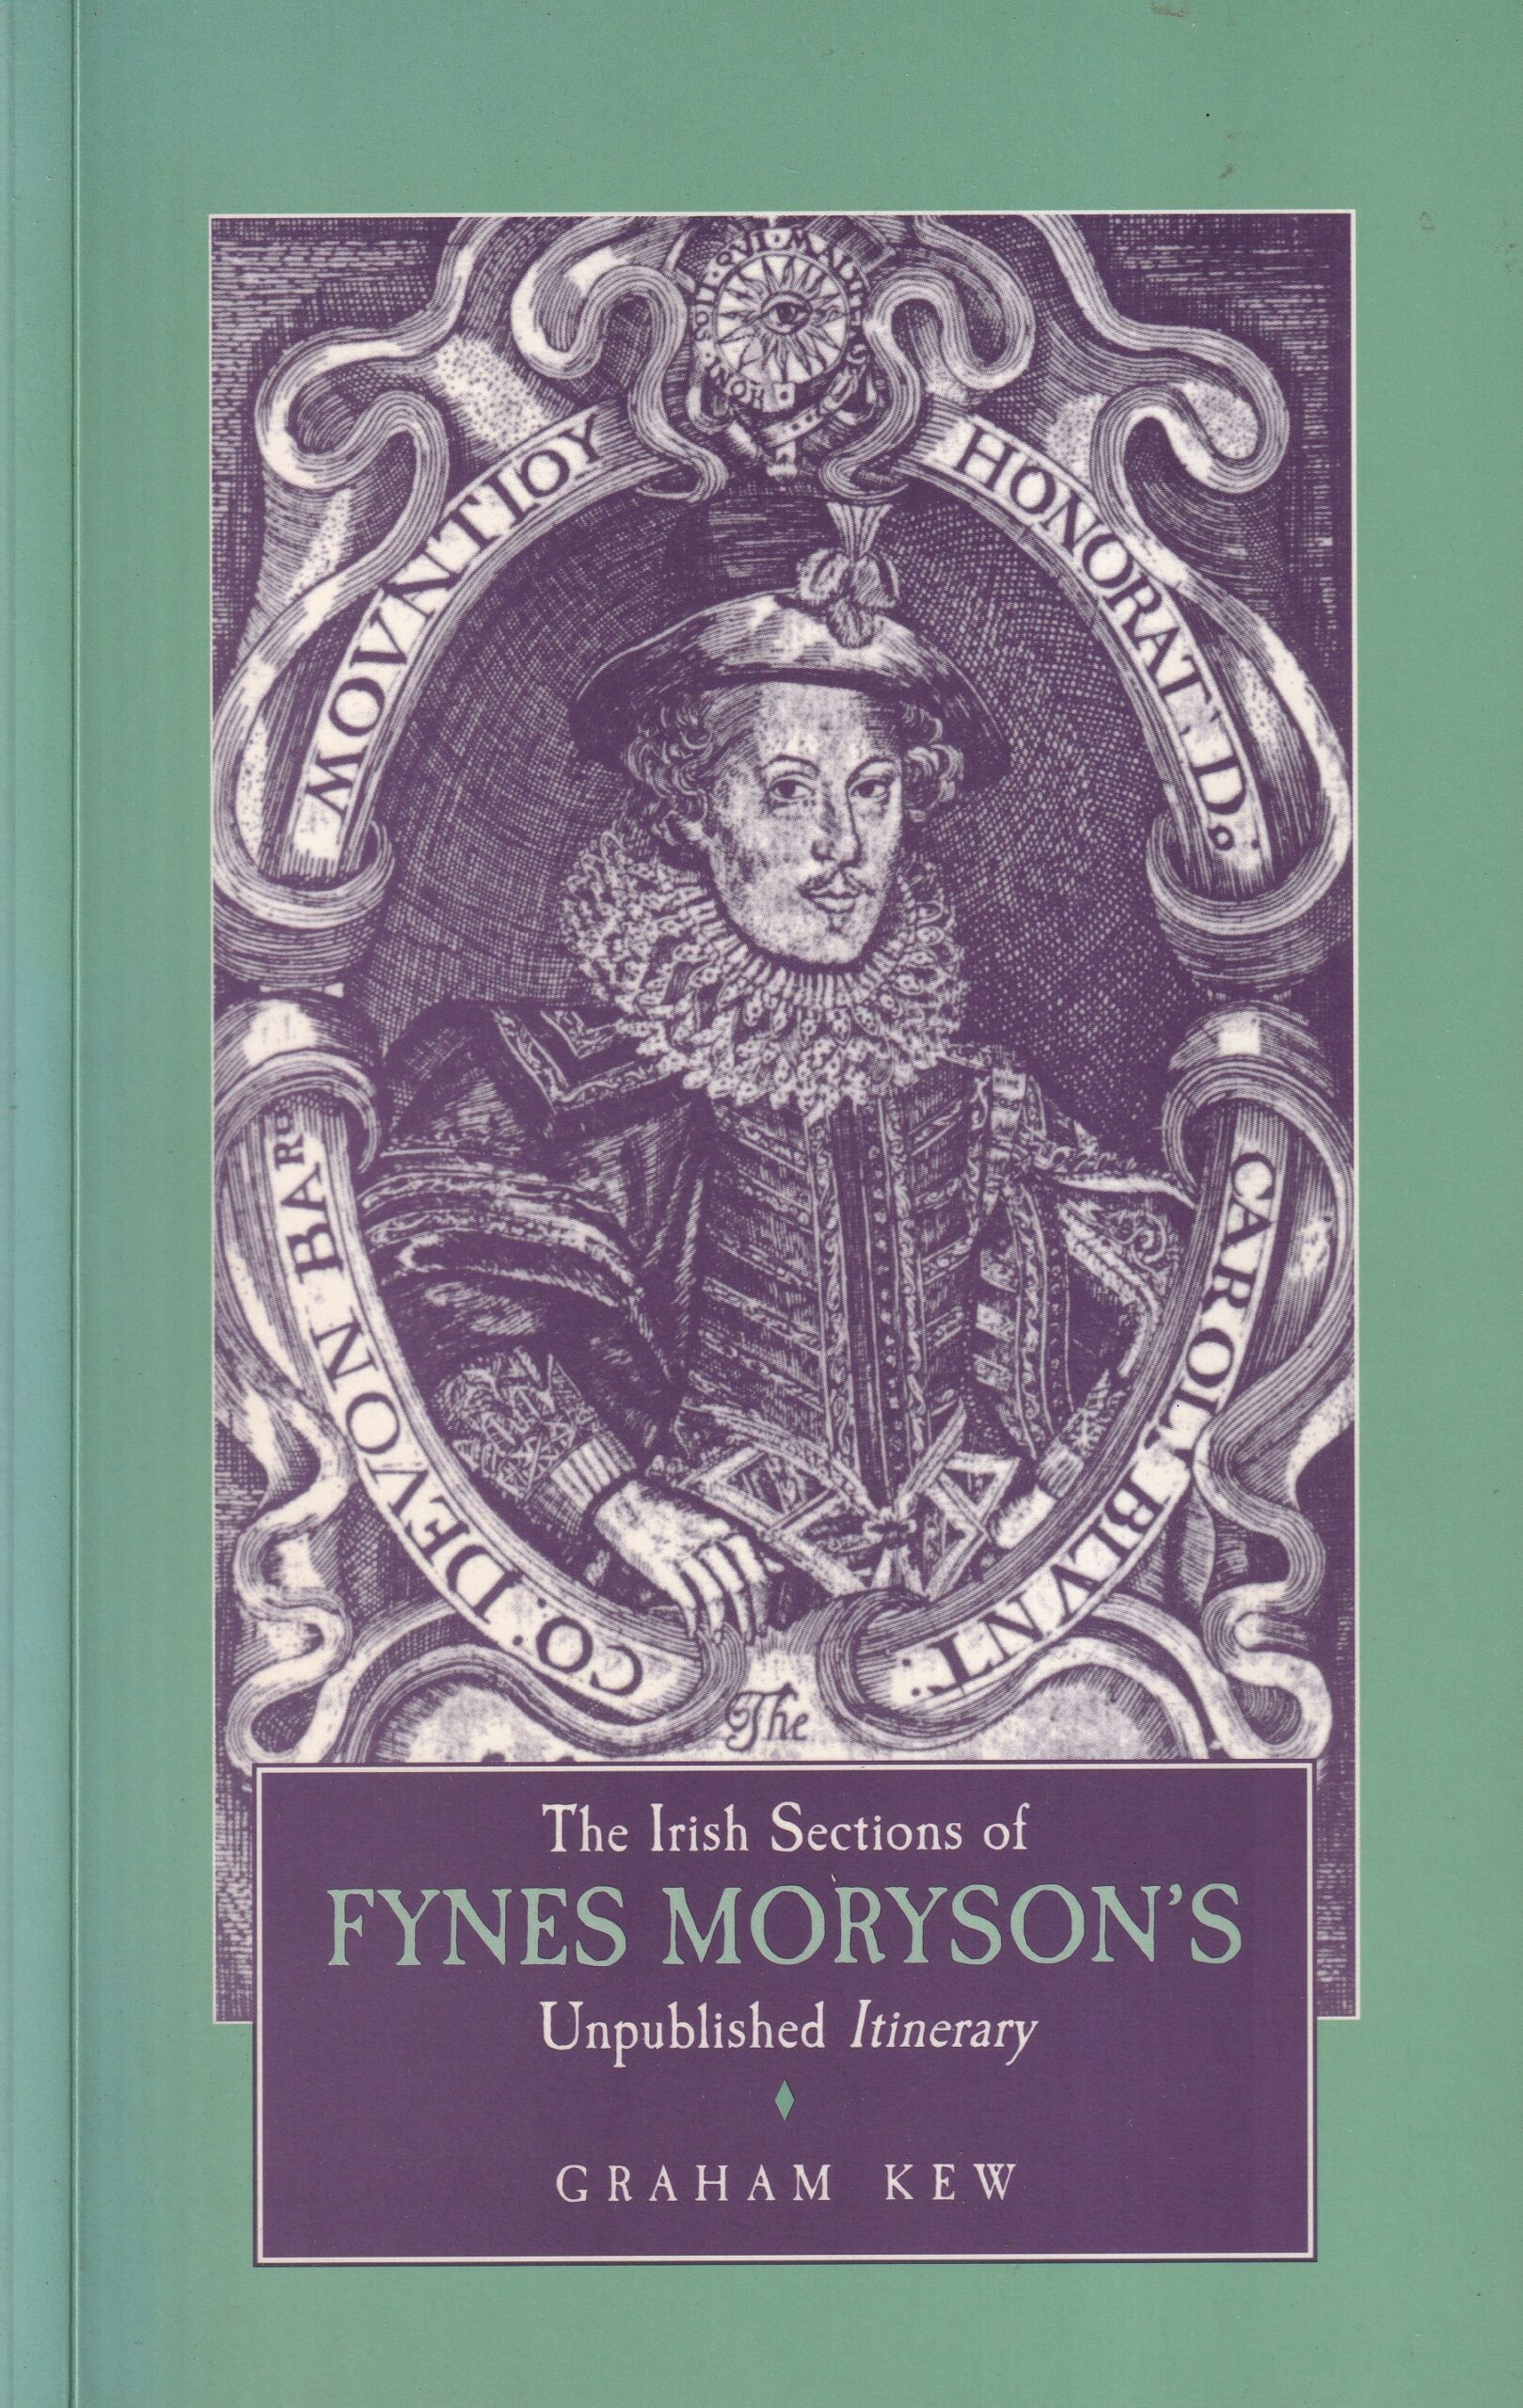 The Irish Sections of Fynes Moryson’s Unpublished Itinerary by Graham Kew